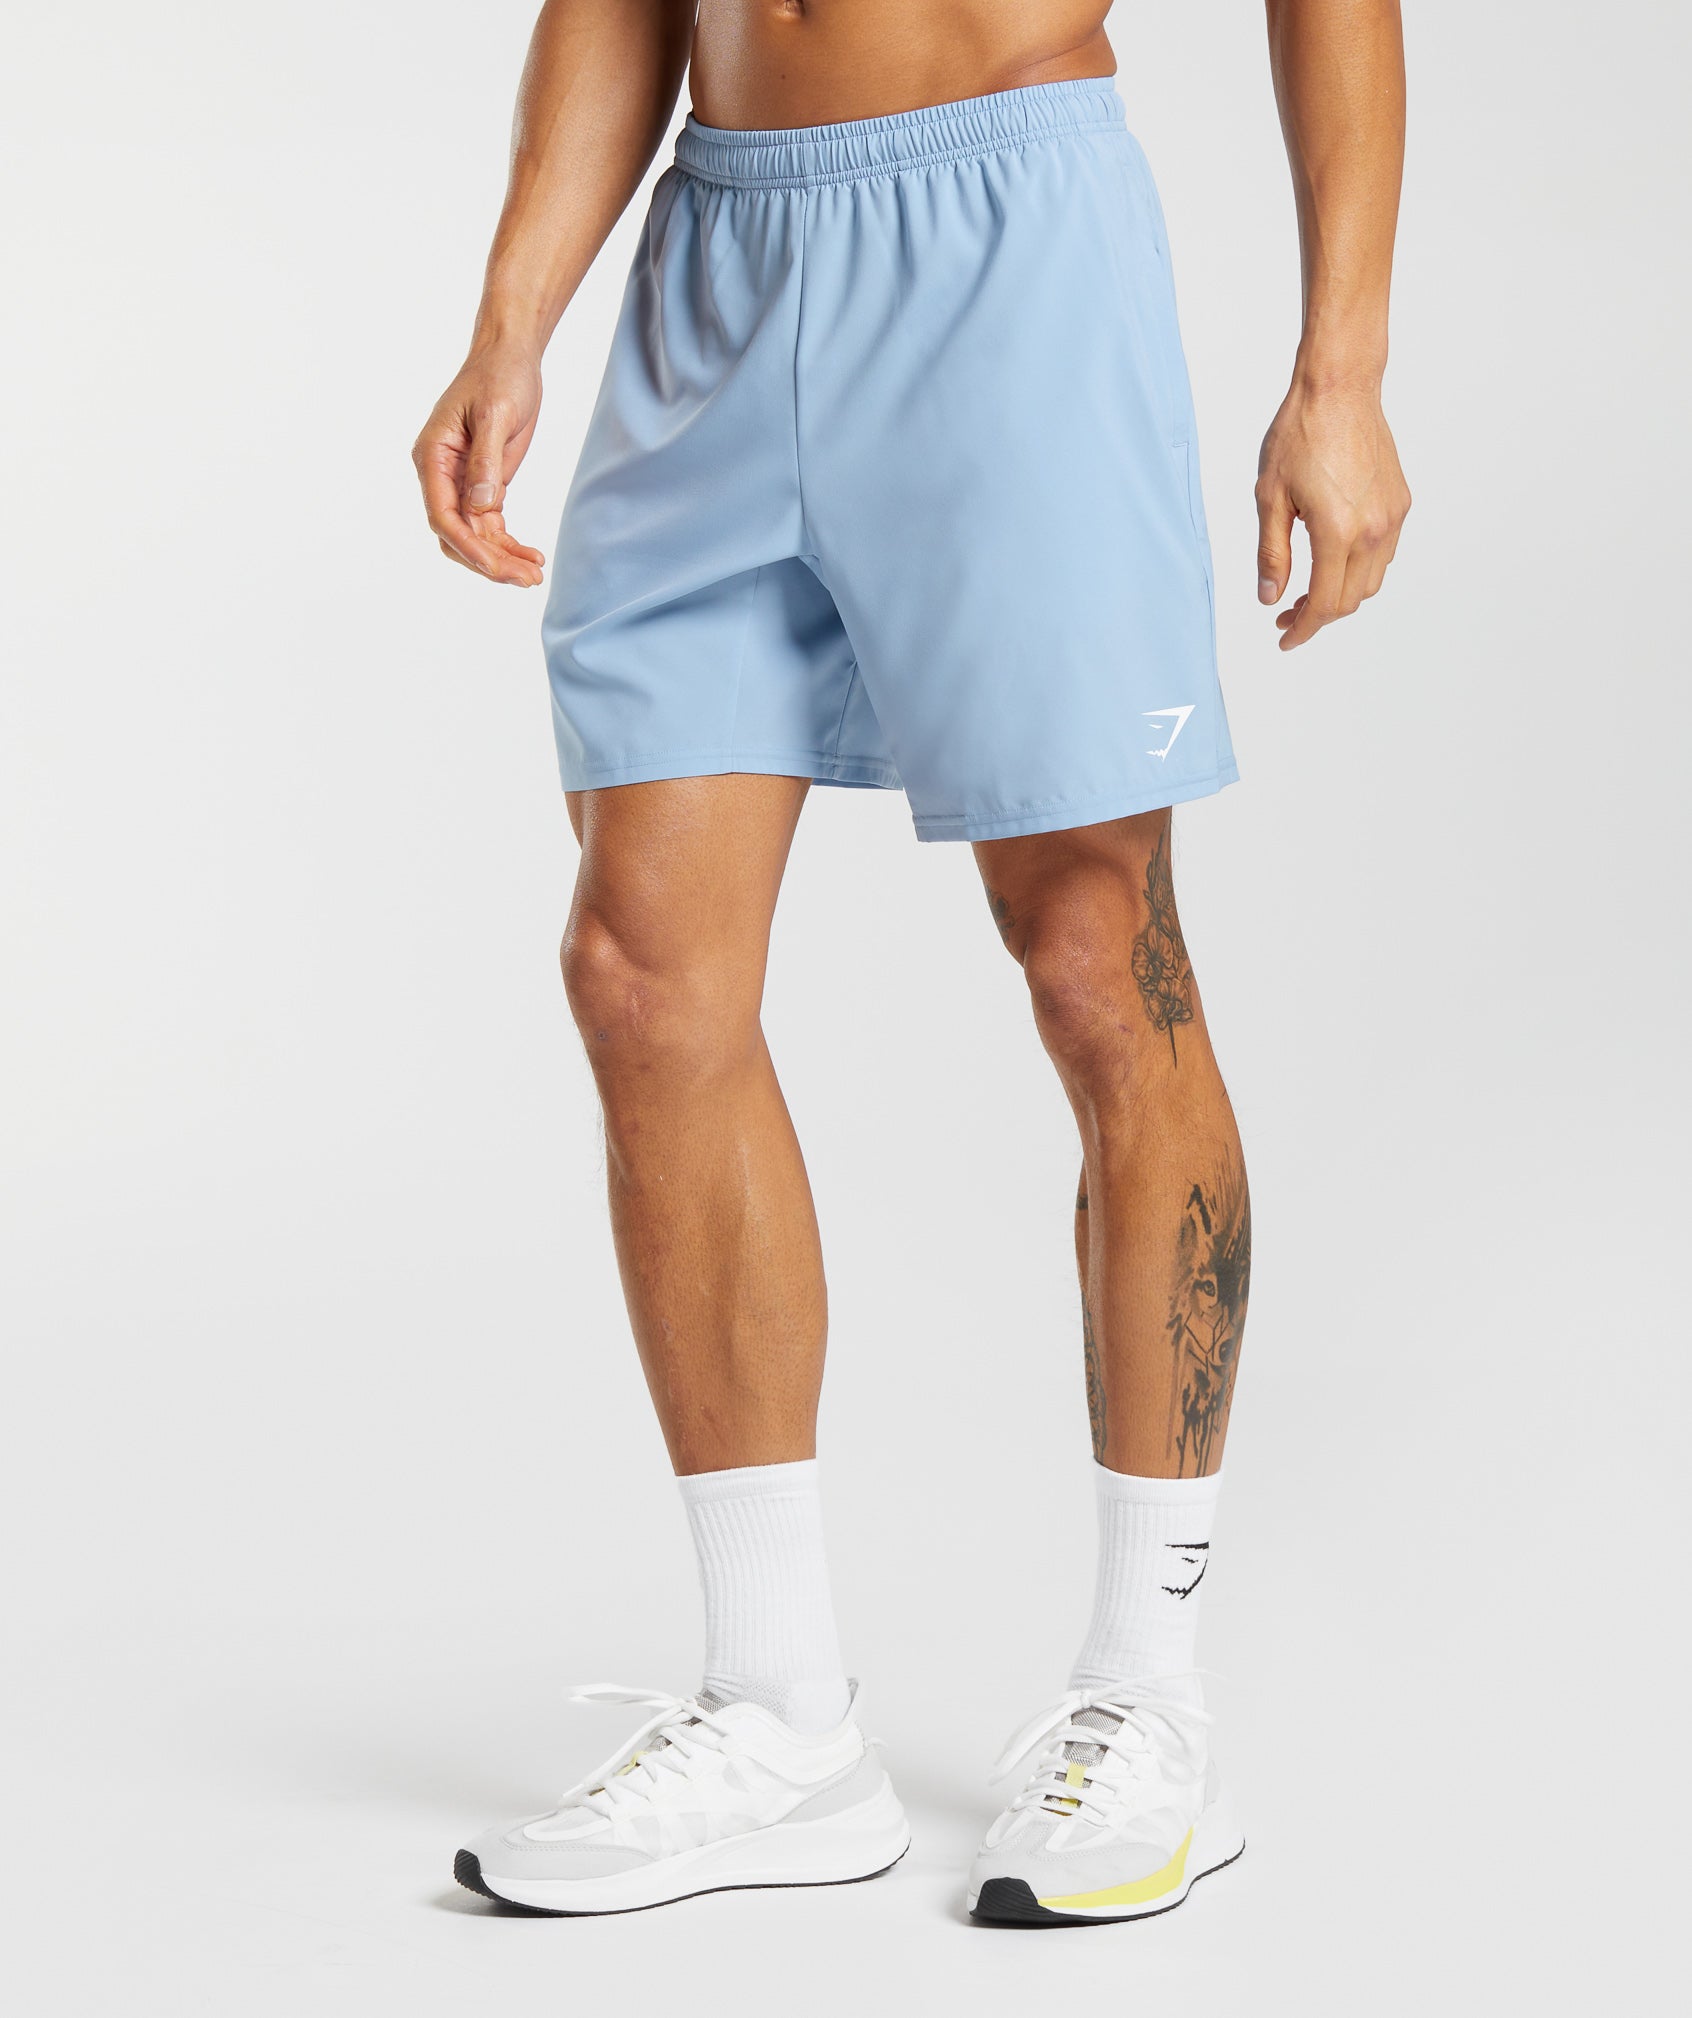 Arrival 7" Shorts in Ozone Blue